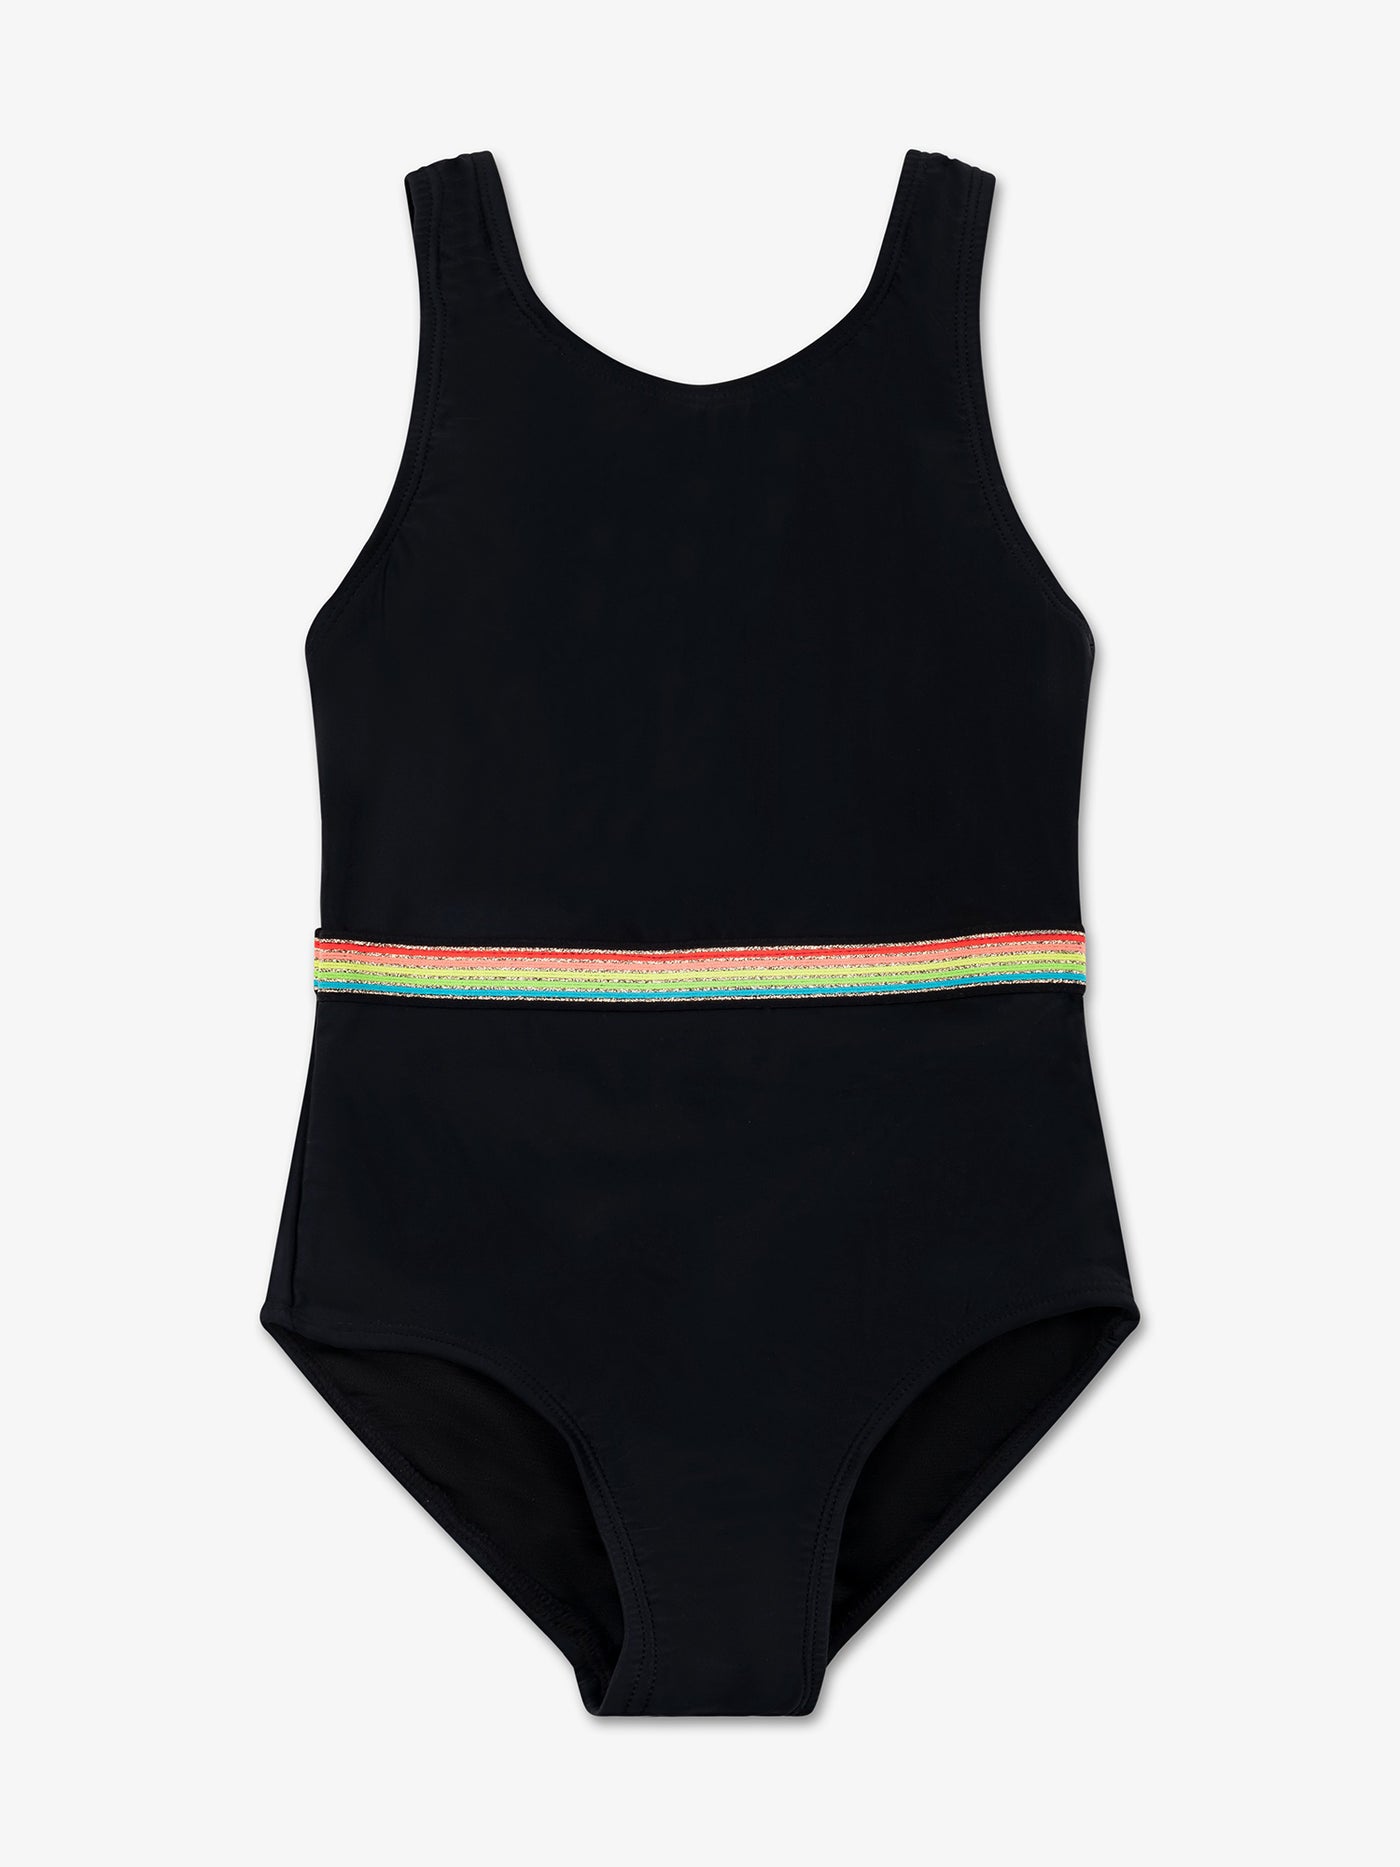 CAMILLE- Multicolor Band One Piece Swimsuit